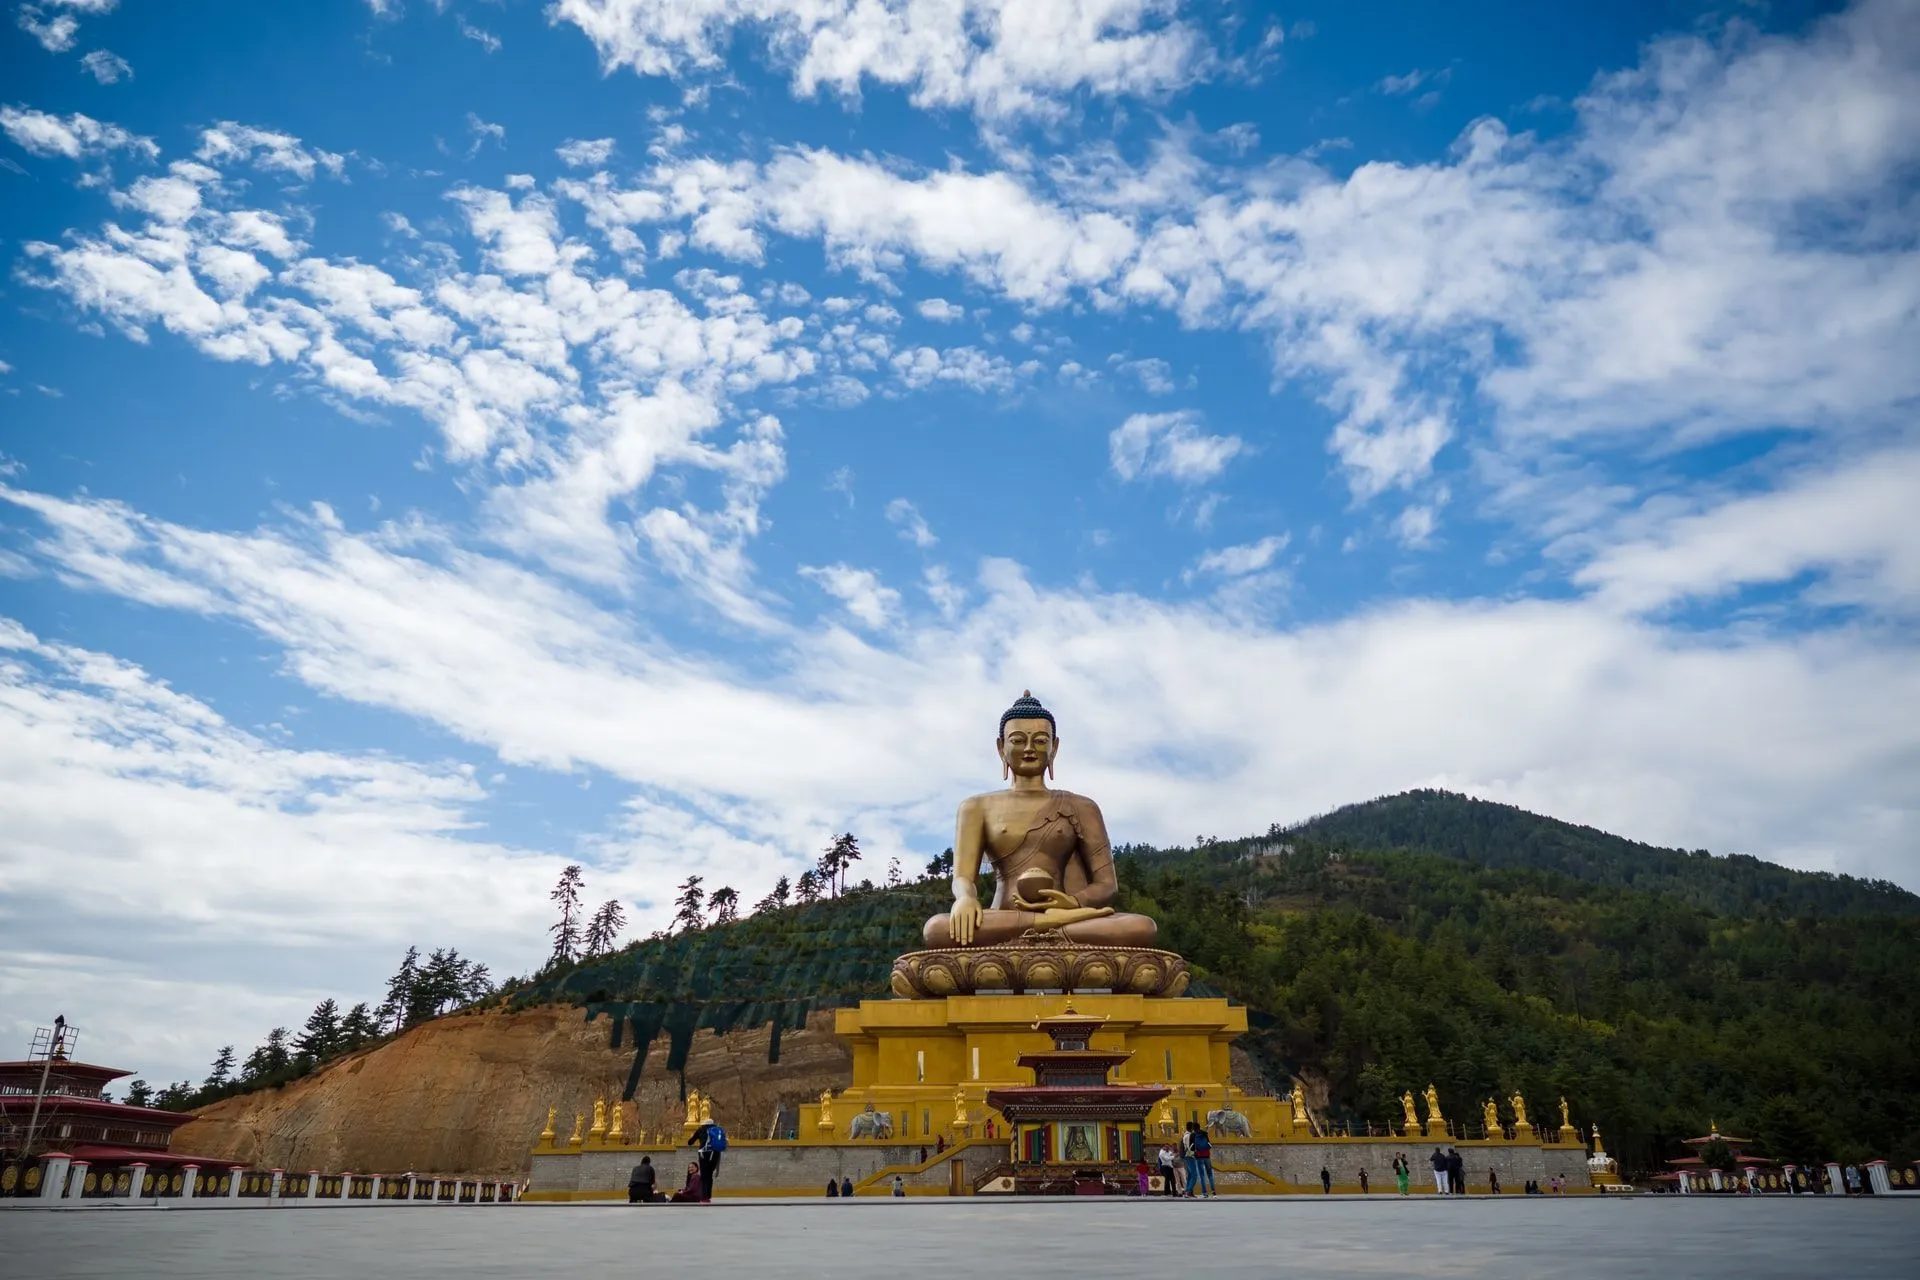 Did you know the Dzong monastery is one of the largest Buddha monasteries in Asia?